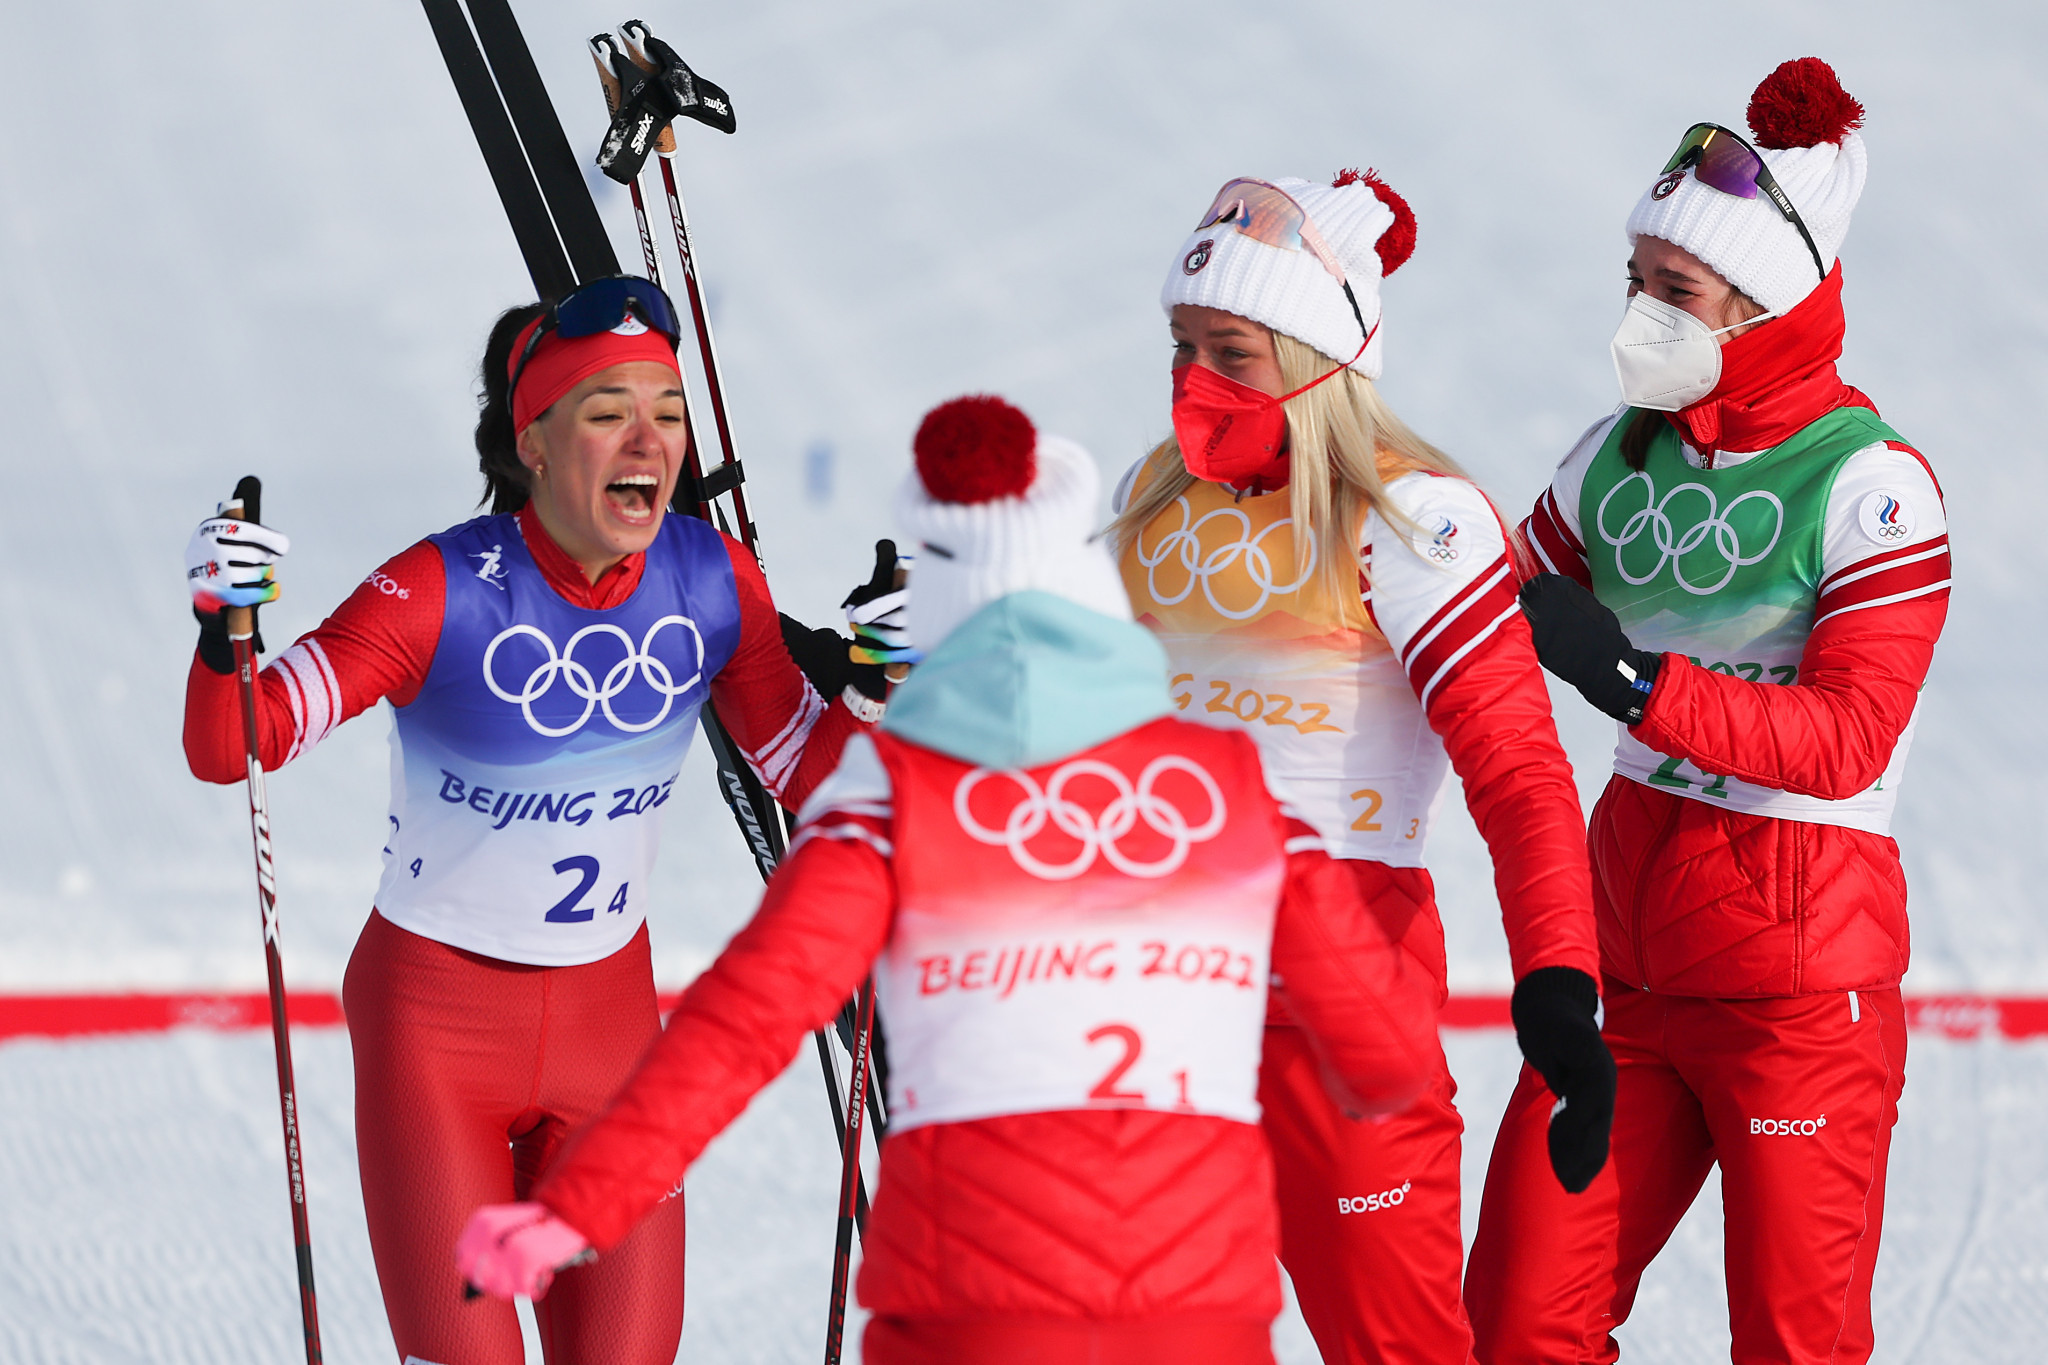 The Russian Olympic Committee team celebrate at the finish line after winning gold in the women's 4x5 kilometres cross-country skiing relay ©Getty Images 